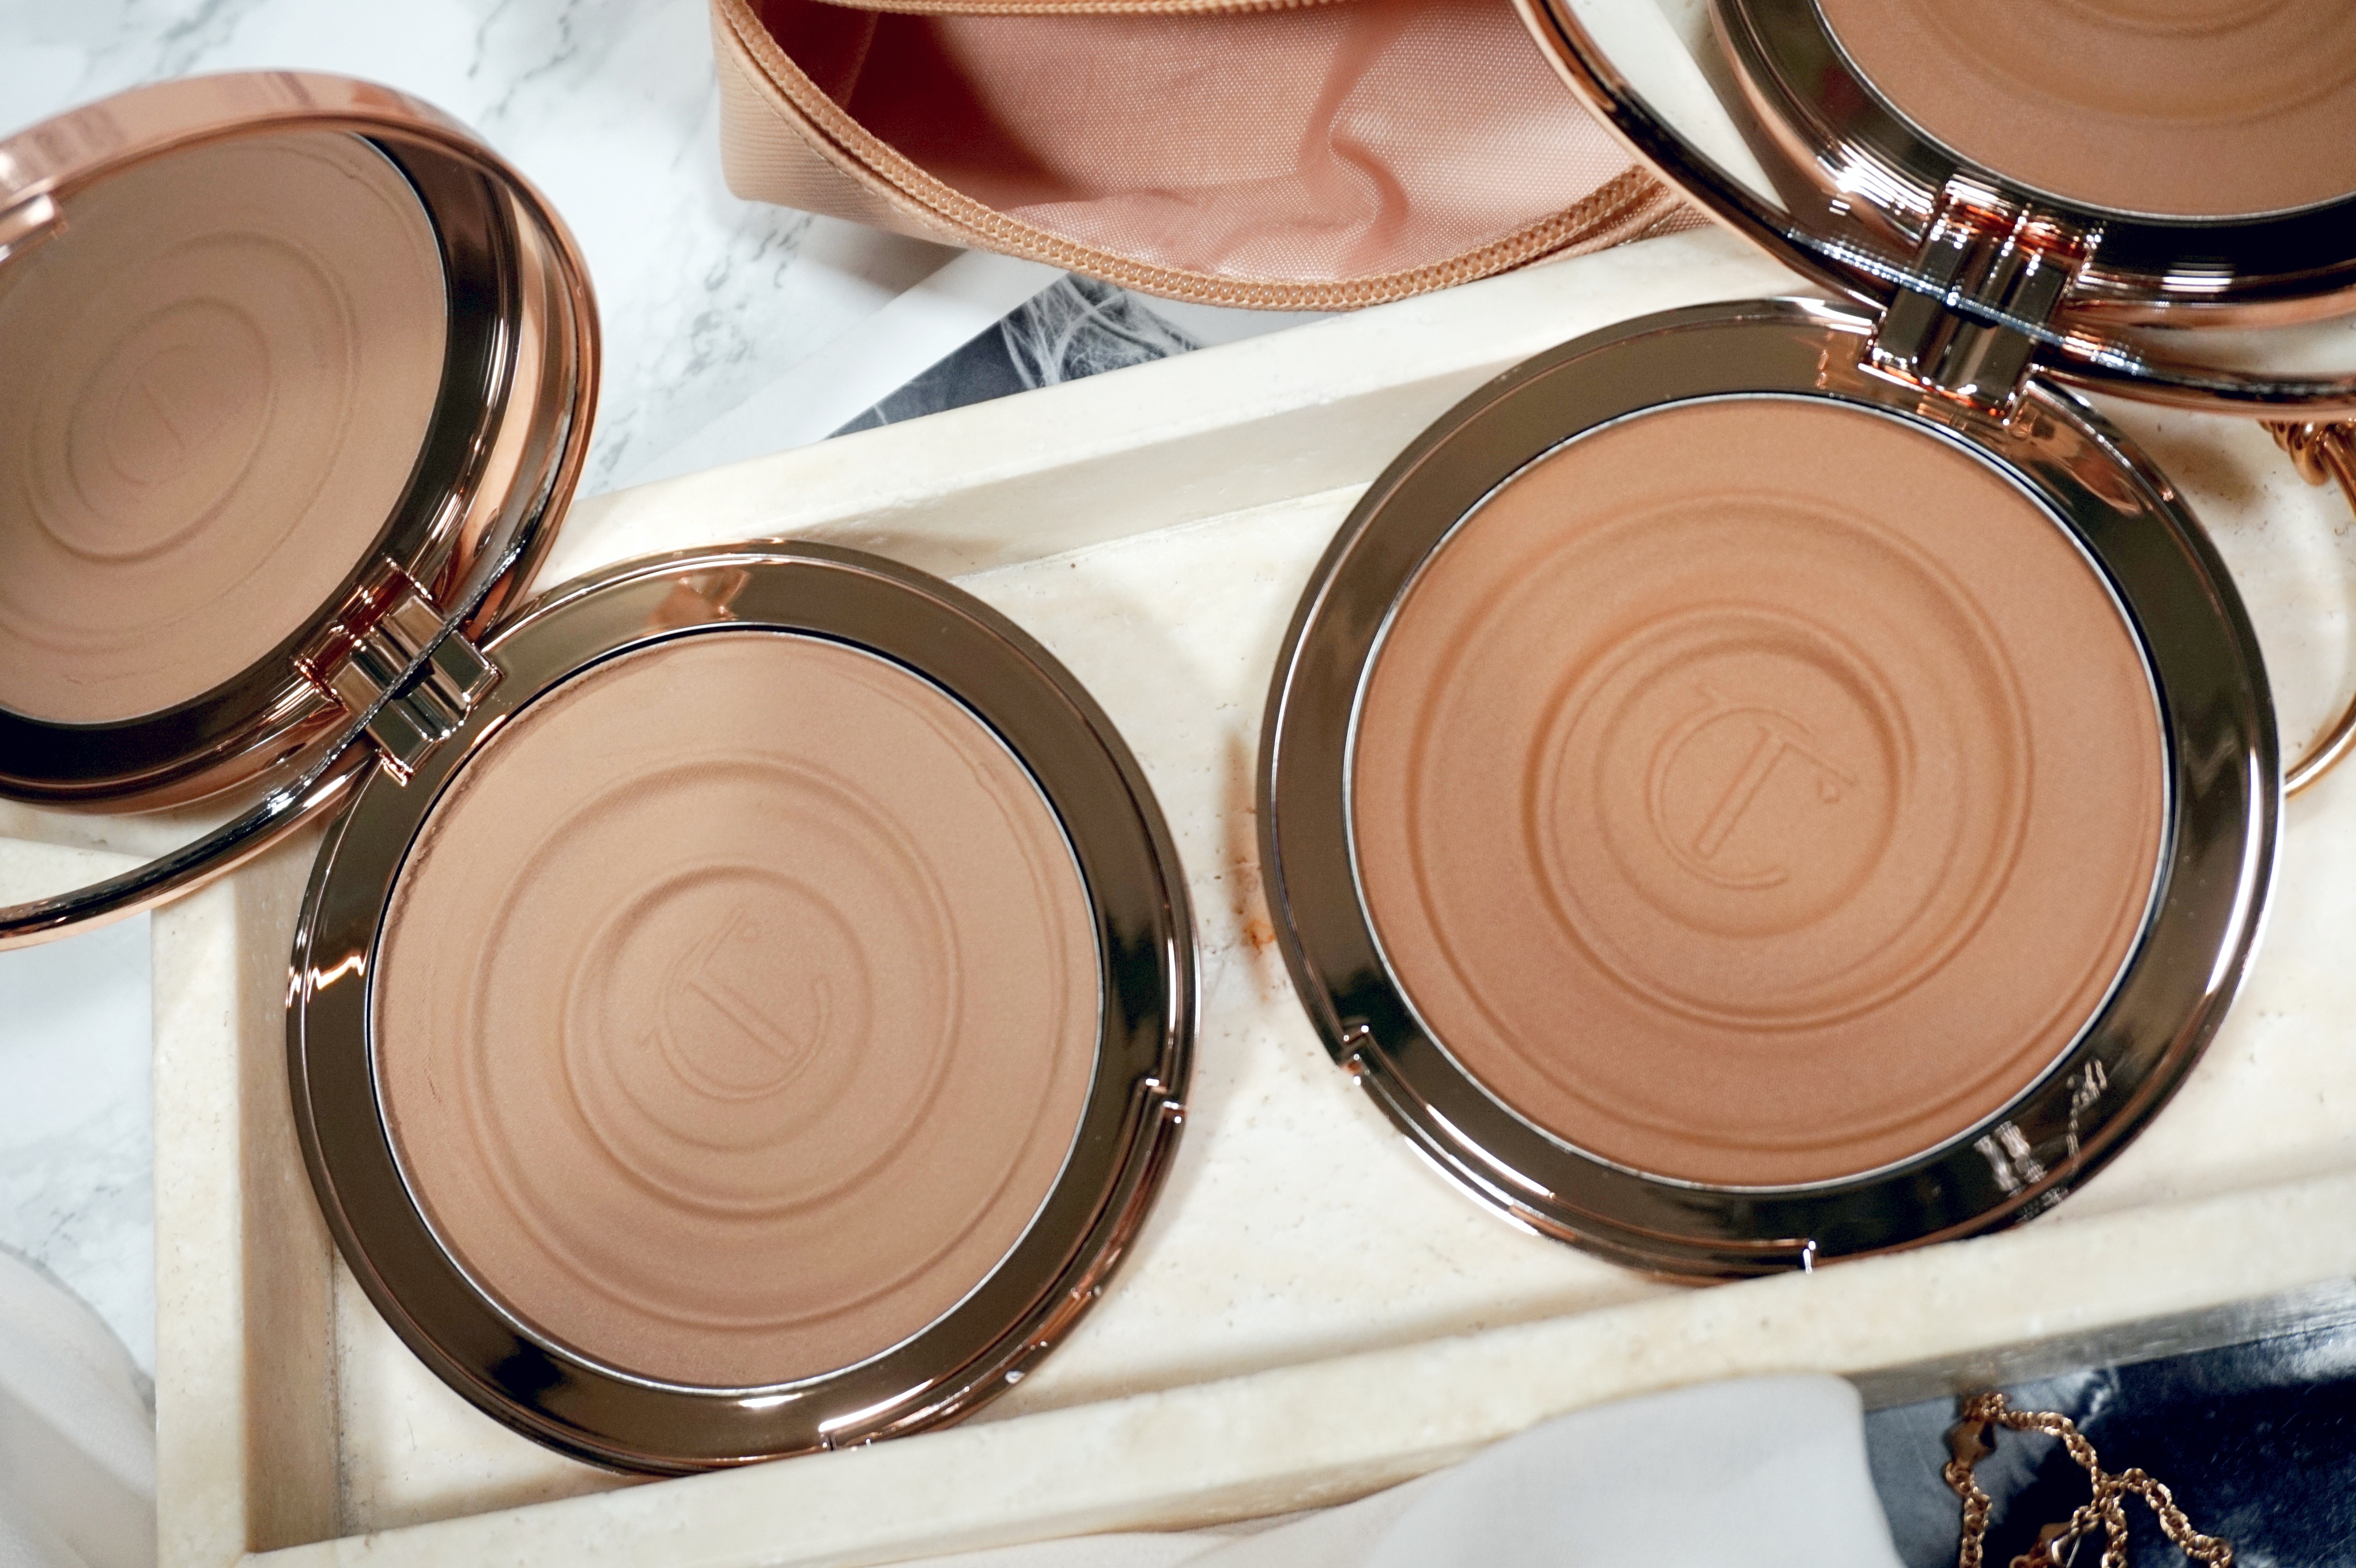 Charlotte Tilbury Beautiful Skin Sun-Kissed Glow Bronzer Review and Swatches